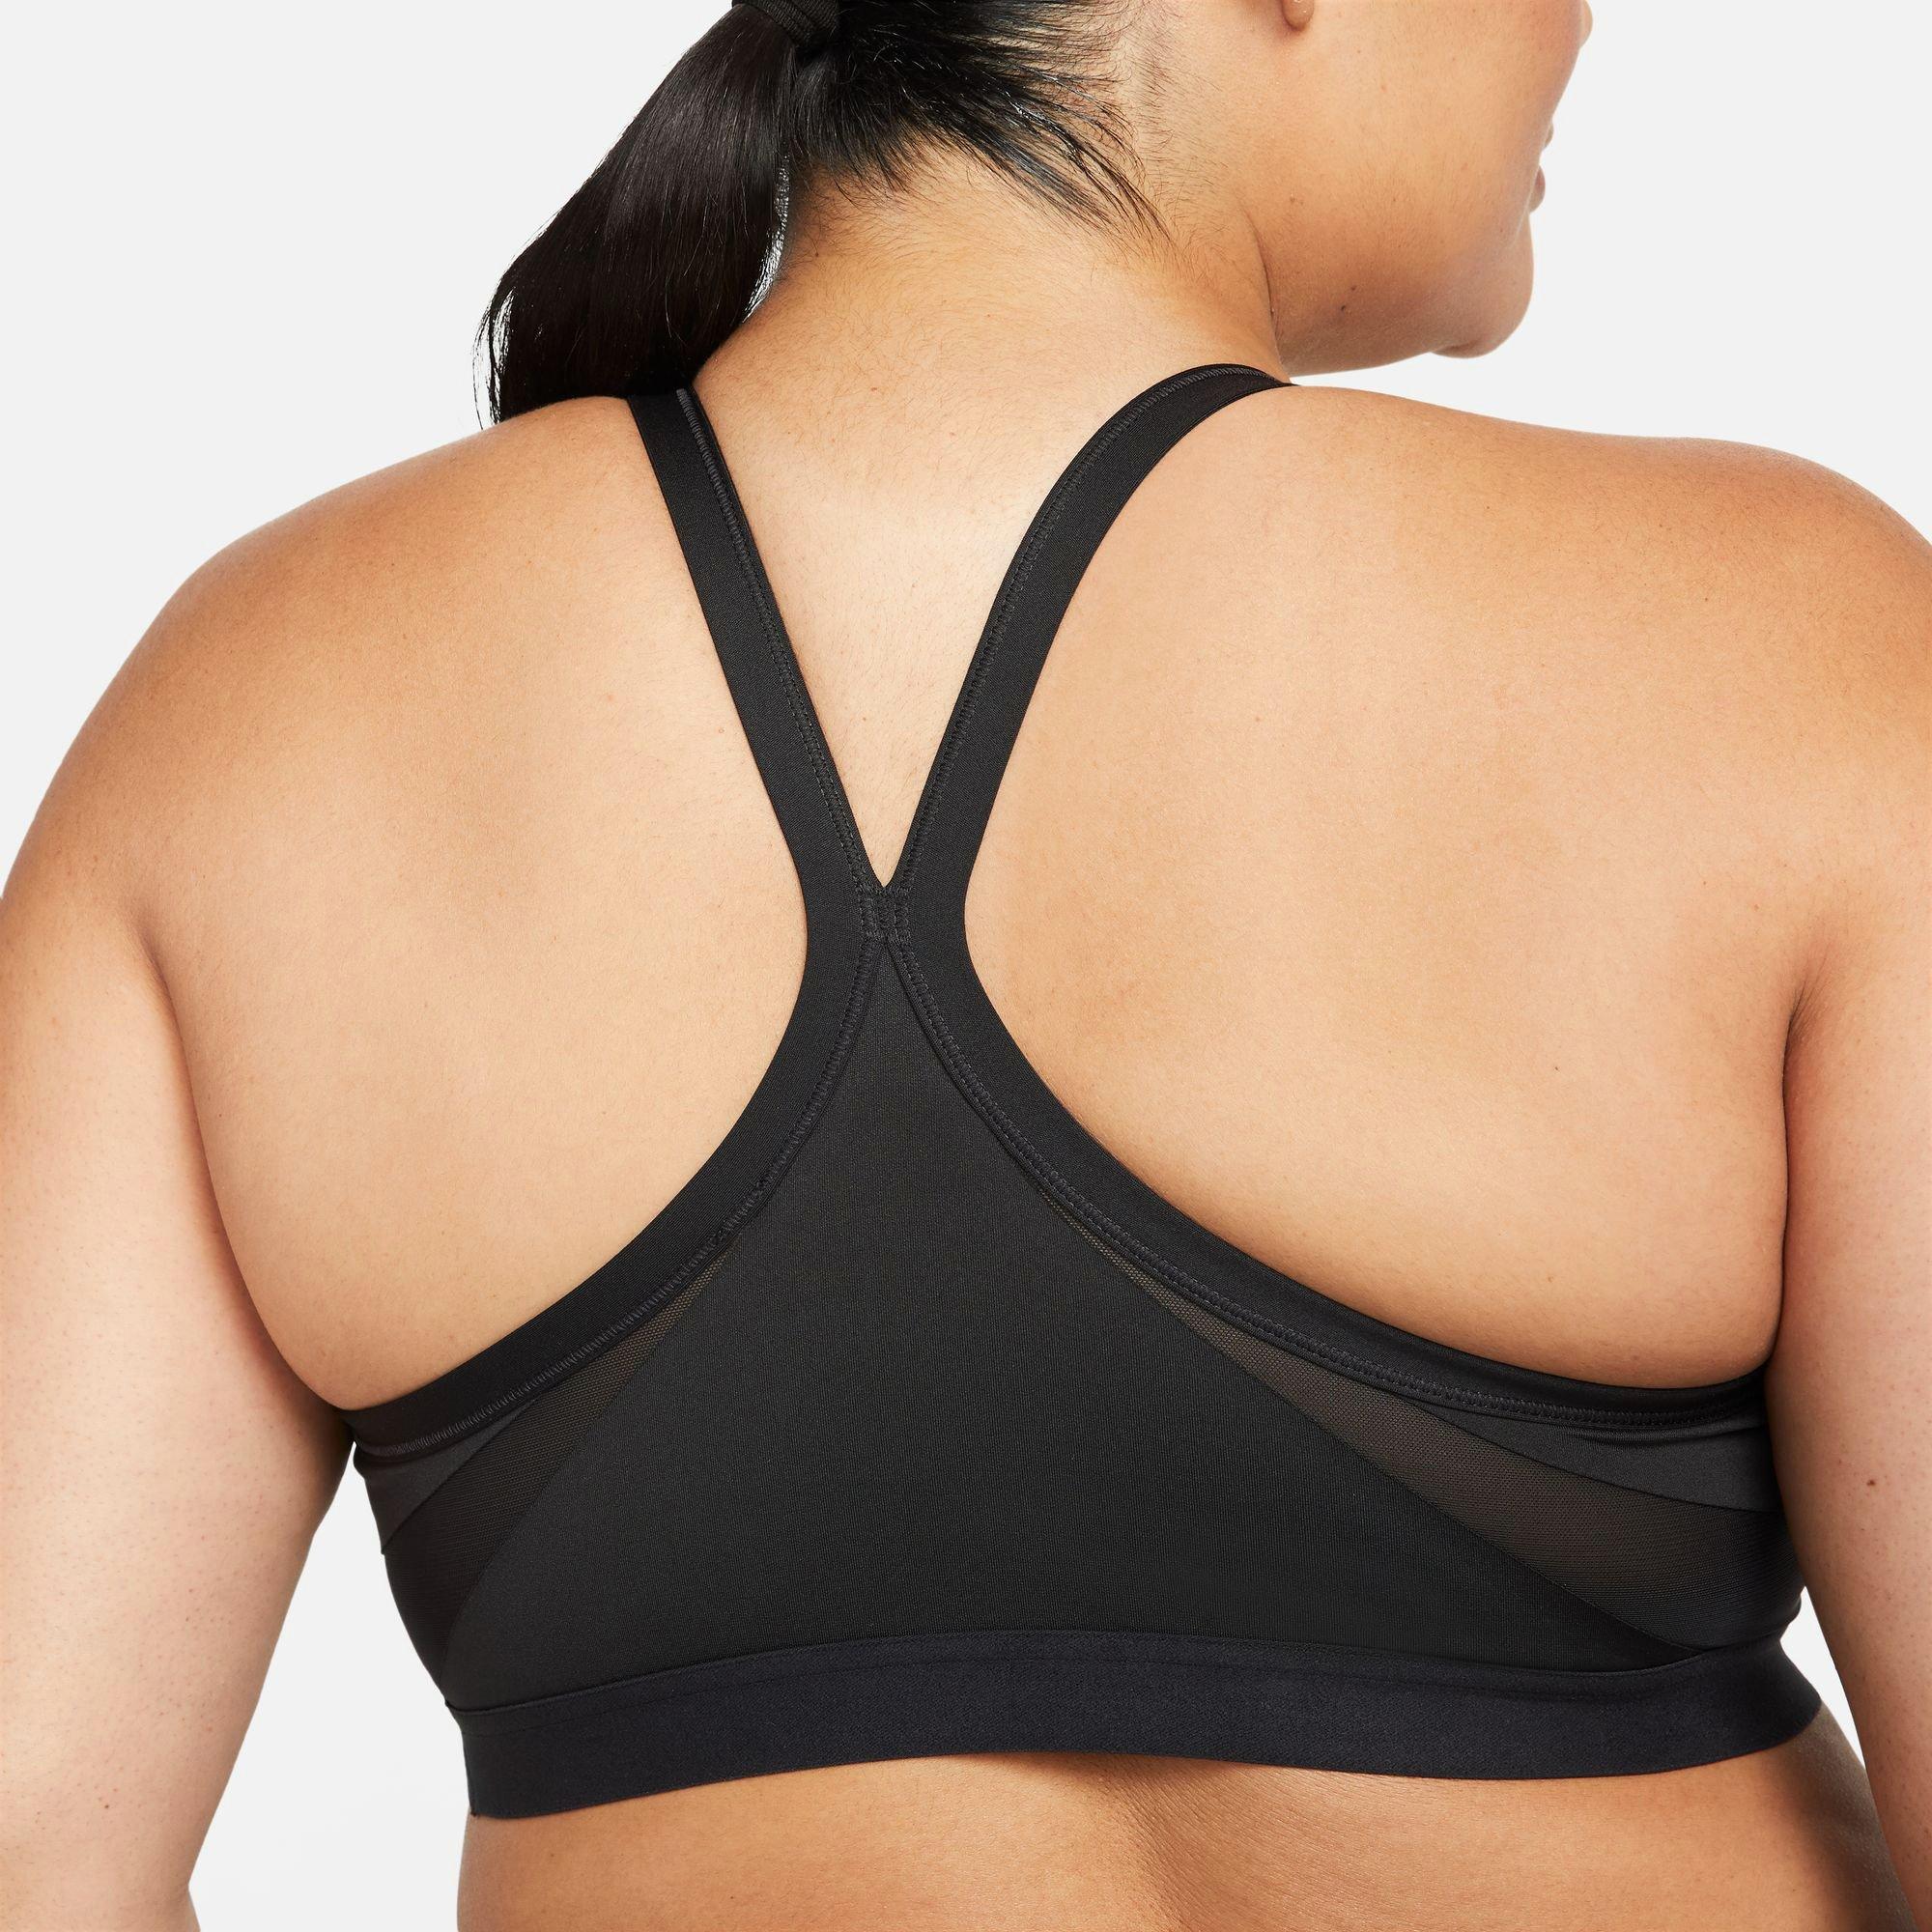 Women's Nike Indy UltraBreathe Training Sports Bra Black Size XS NWT - $50  New With Tags - From Tinnie